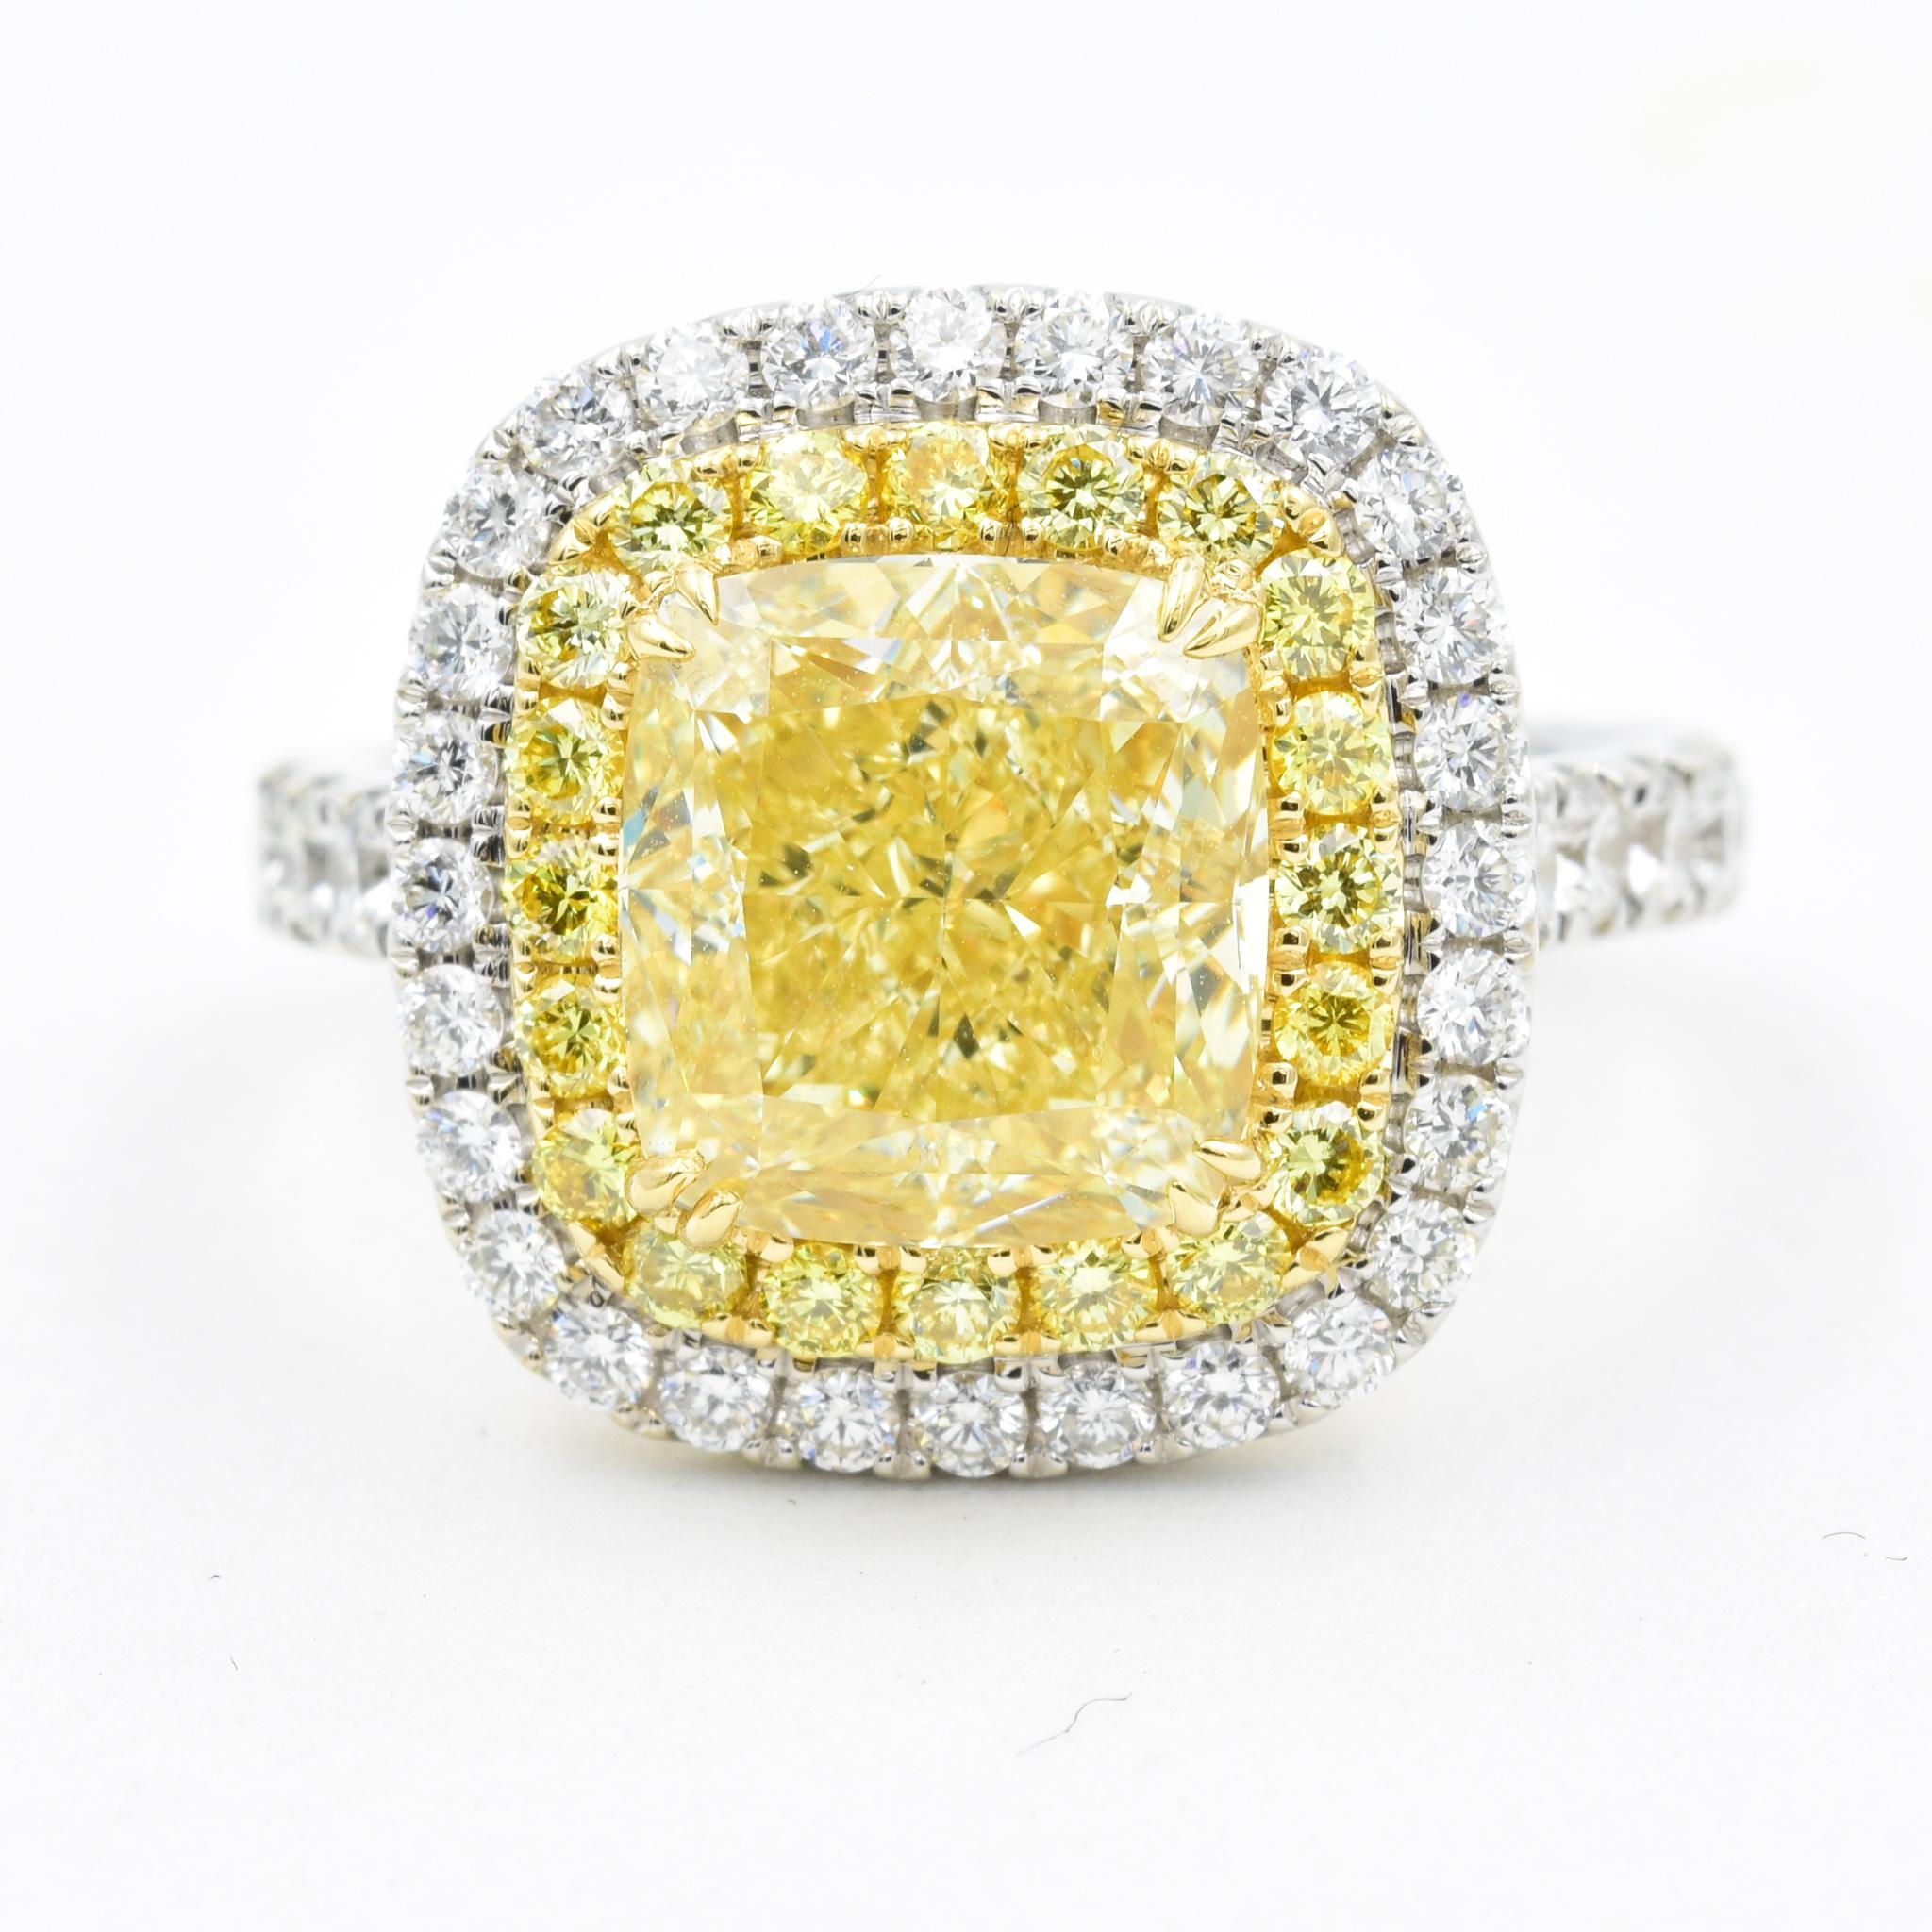 This gorgeous diamond ring features a GIA Certified cushion cut center diamond with fancy yellow color.  The diamond double-halo features two rows of diamonds with the inner row being fancy yellow.  The side of the ring features round brilliant cut